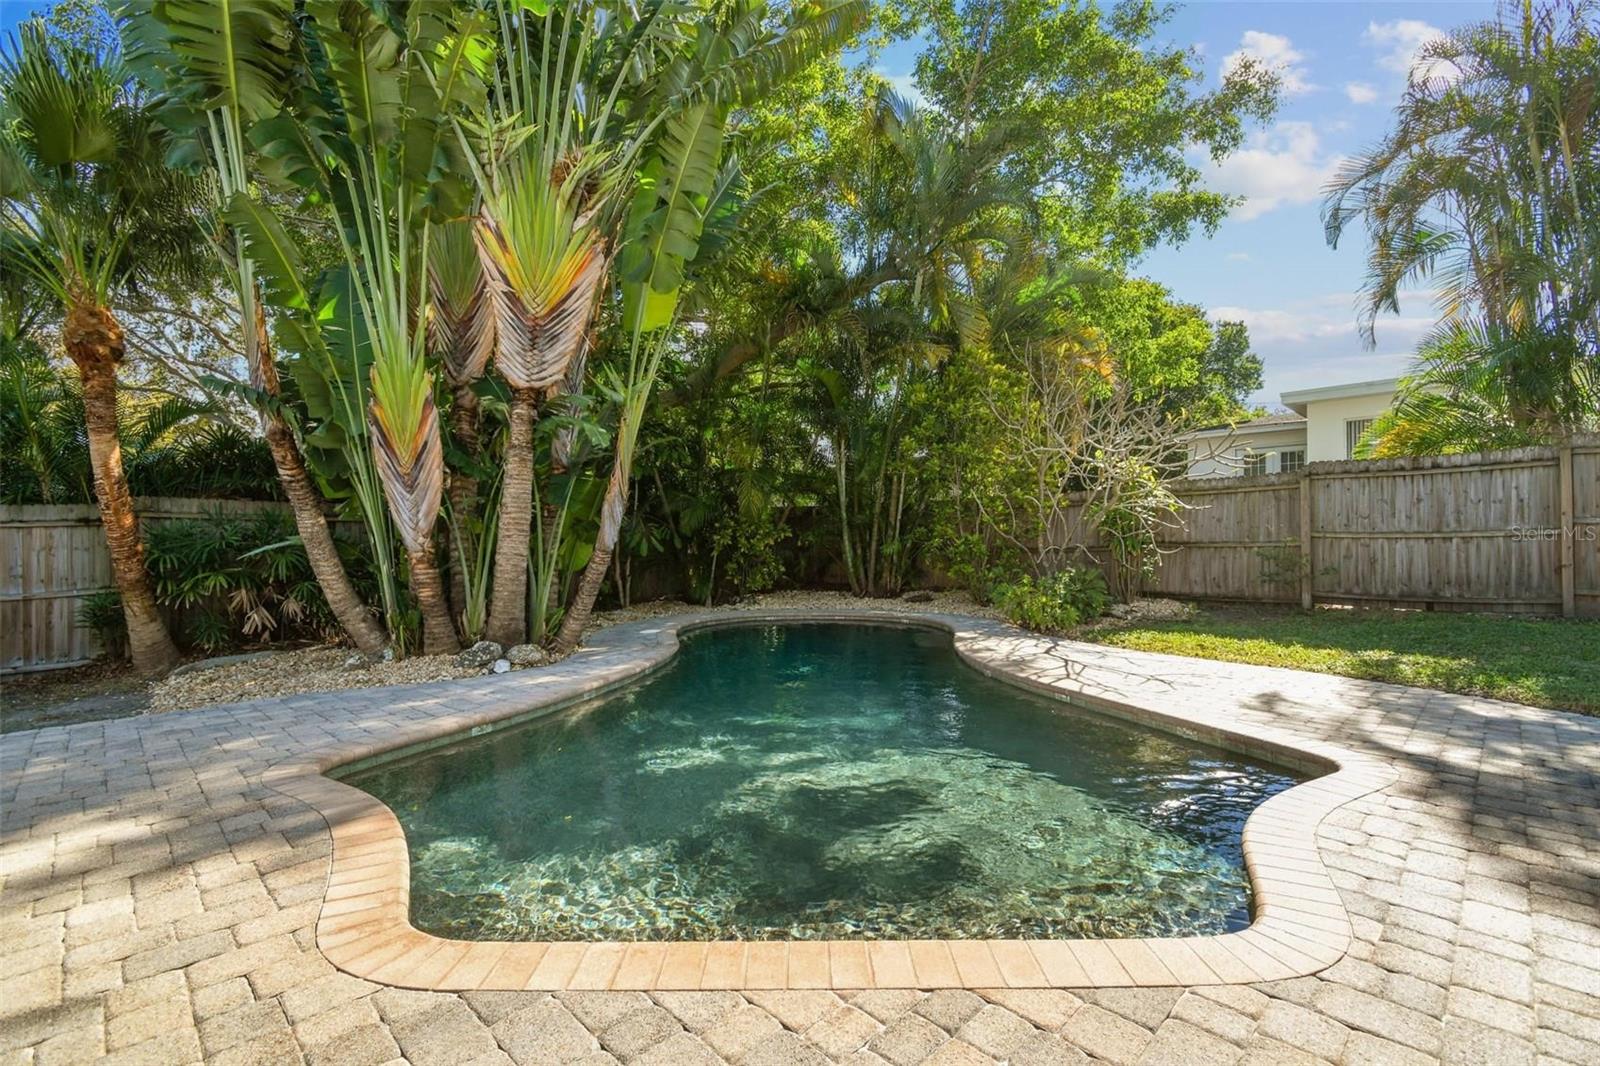 Saltwater Pool with Pebble Tec lagoon finish surrounded by lush, tropical landscaping